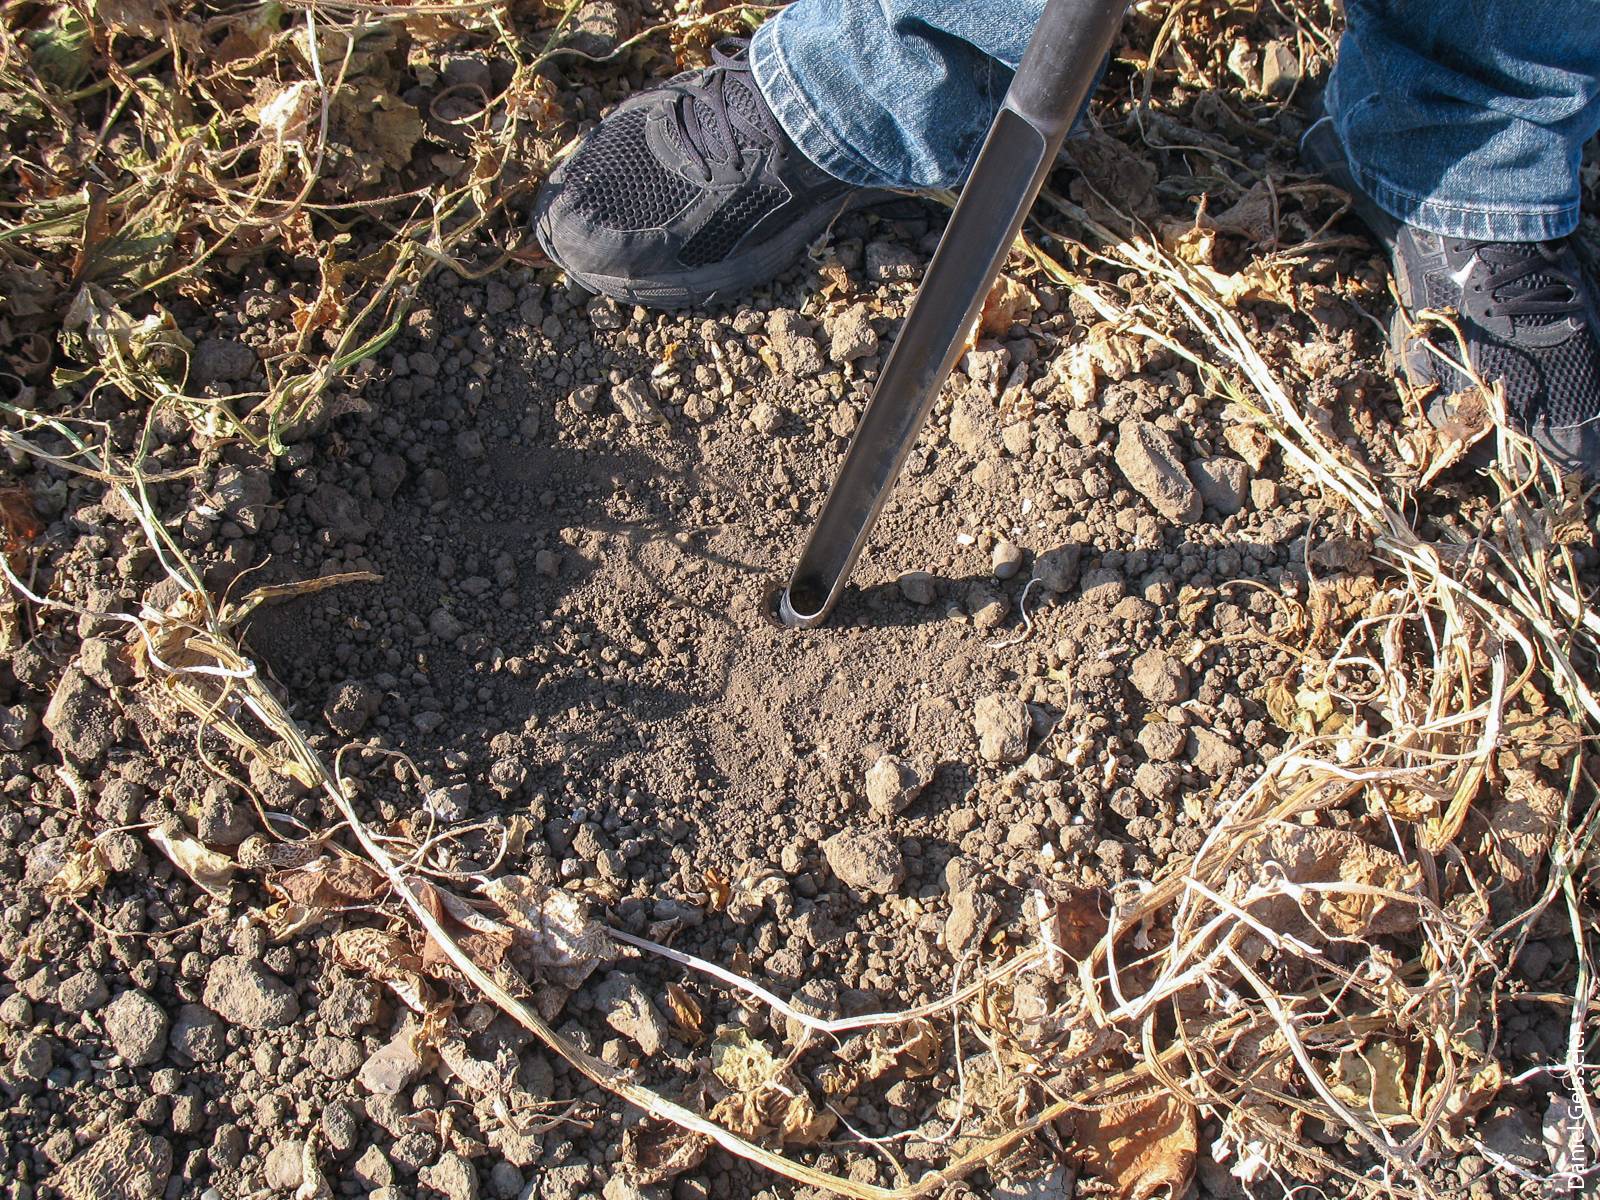 Residue on the soil surface needs to be removed before the soil sample is taken.